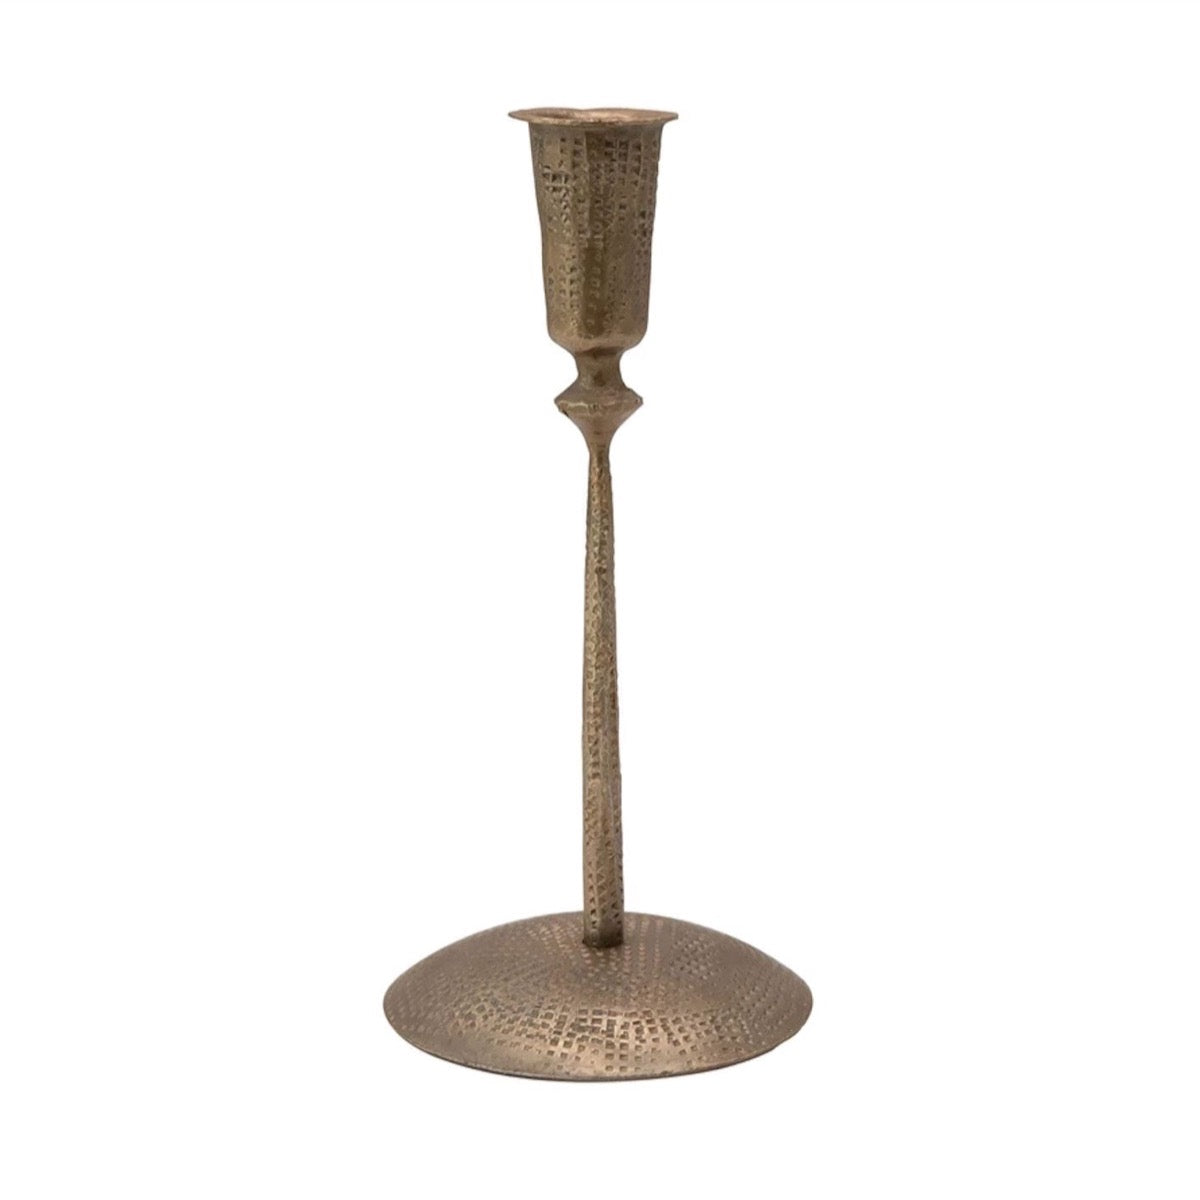 Hammered Iron Candlestick Holder. Front view.